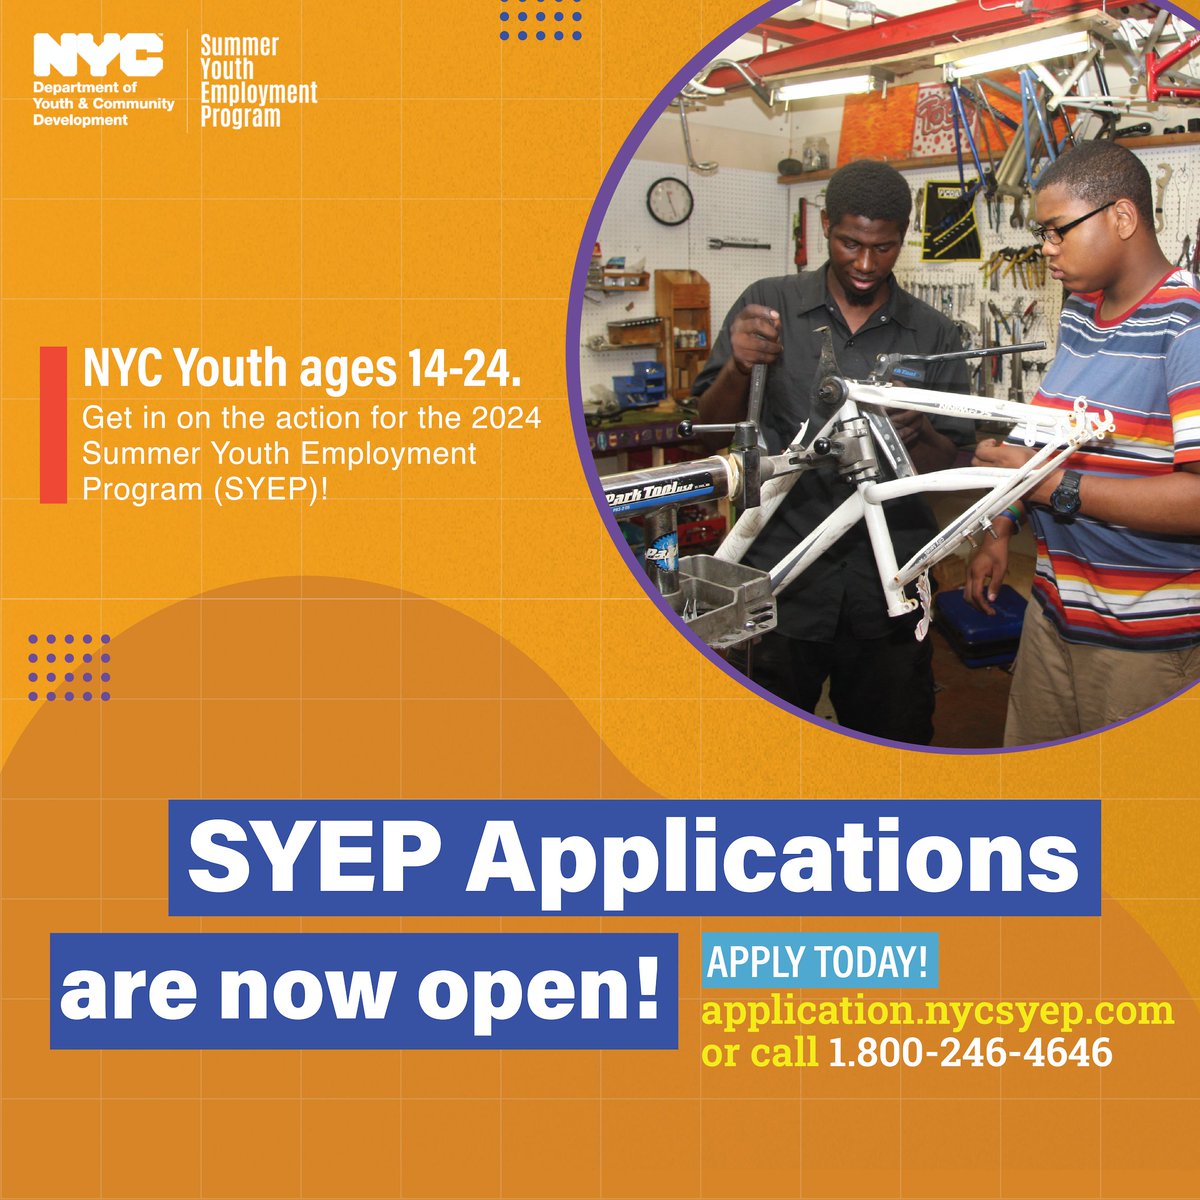 The 2024 Summer Youth Employment Program (#SYEP) is around the corner! Apply now to gain valuable experience: nyc.gov/SYEP. *To participate in SYEP with BCS select “Brooklyn Bureau of Community Services” as your provider. @nycyouth #NYCSYEP #NYCYouth #DYCD